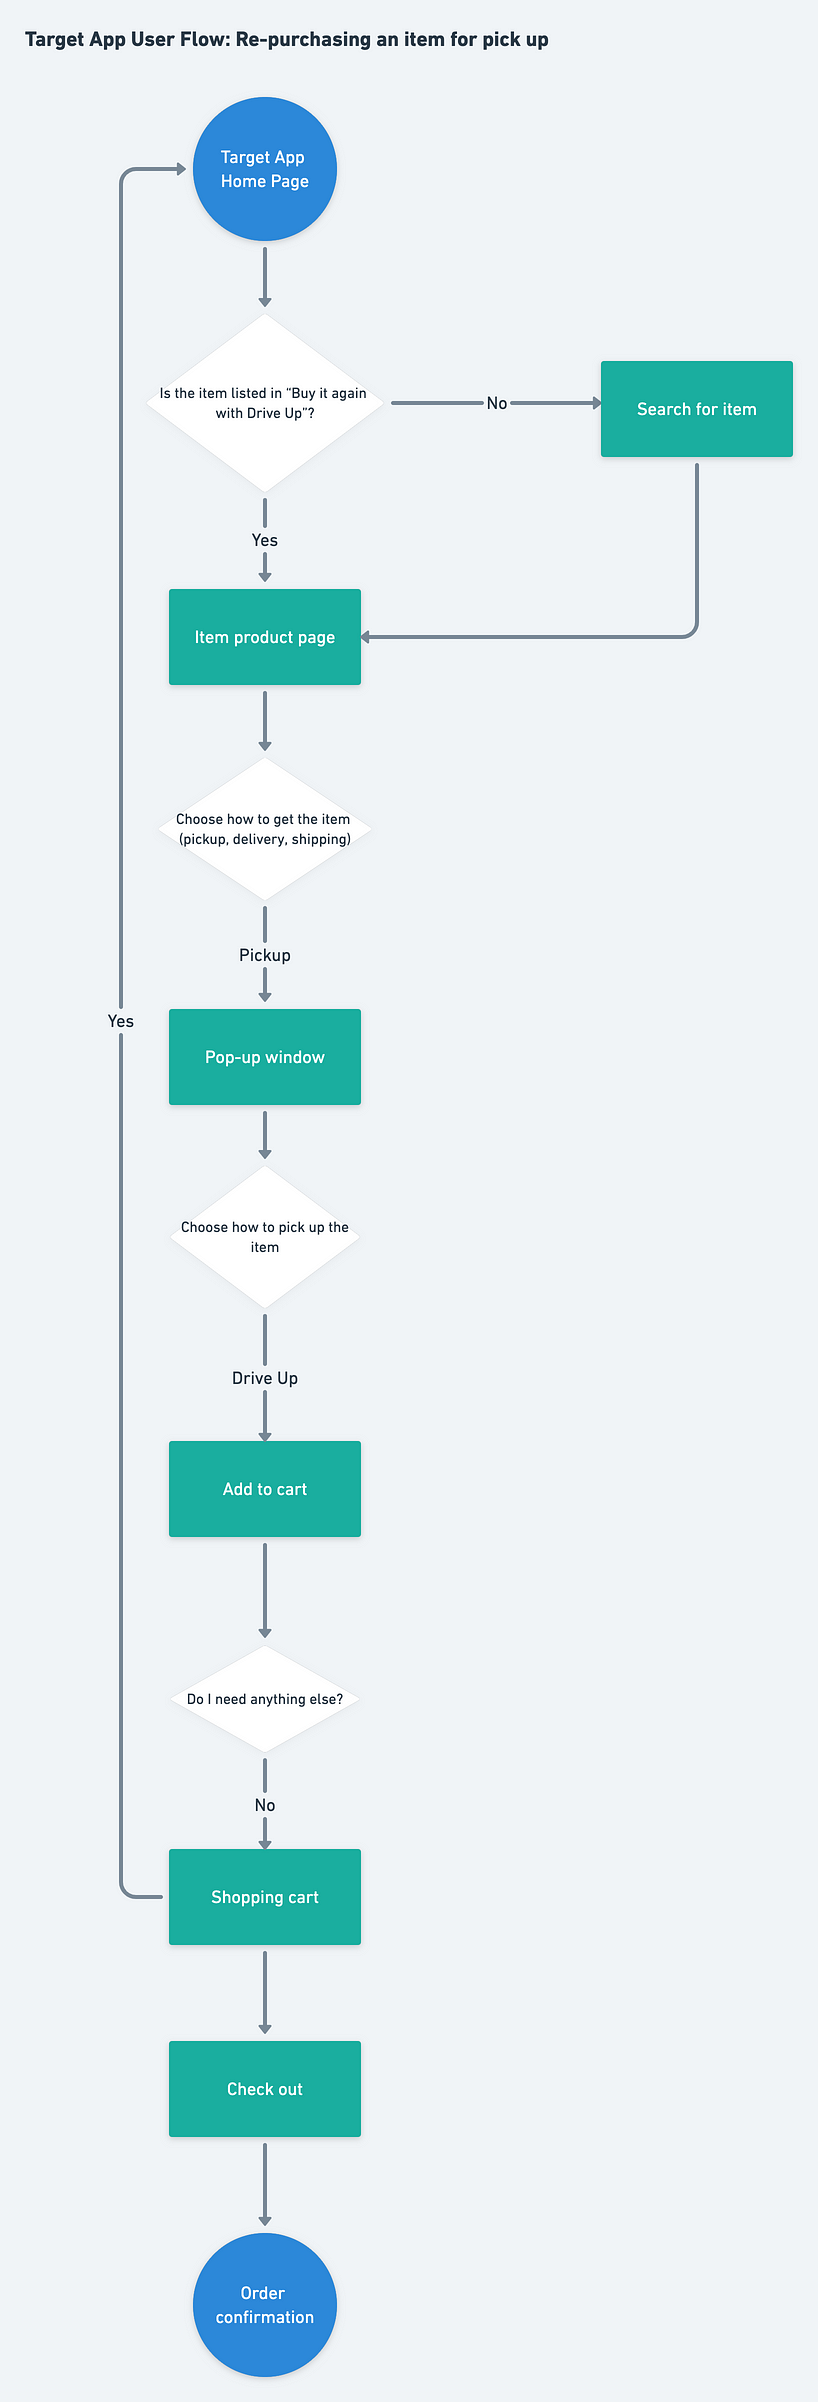 Detailed flow chart outlining the steps in the “re-purchase an item for pick up” user flow on Target. The steps are described in the article text.